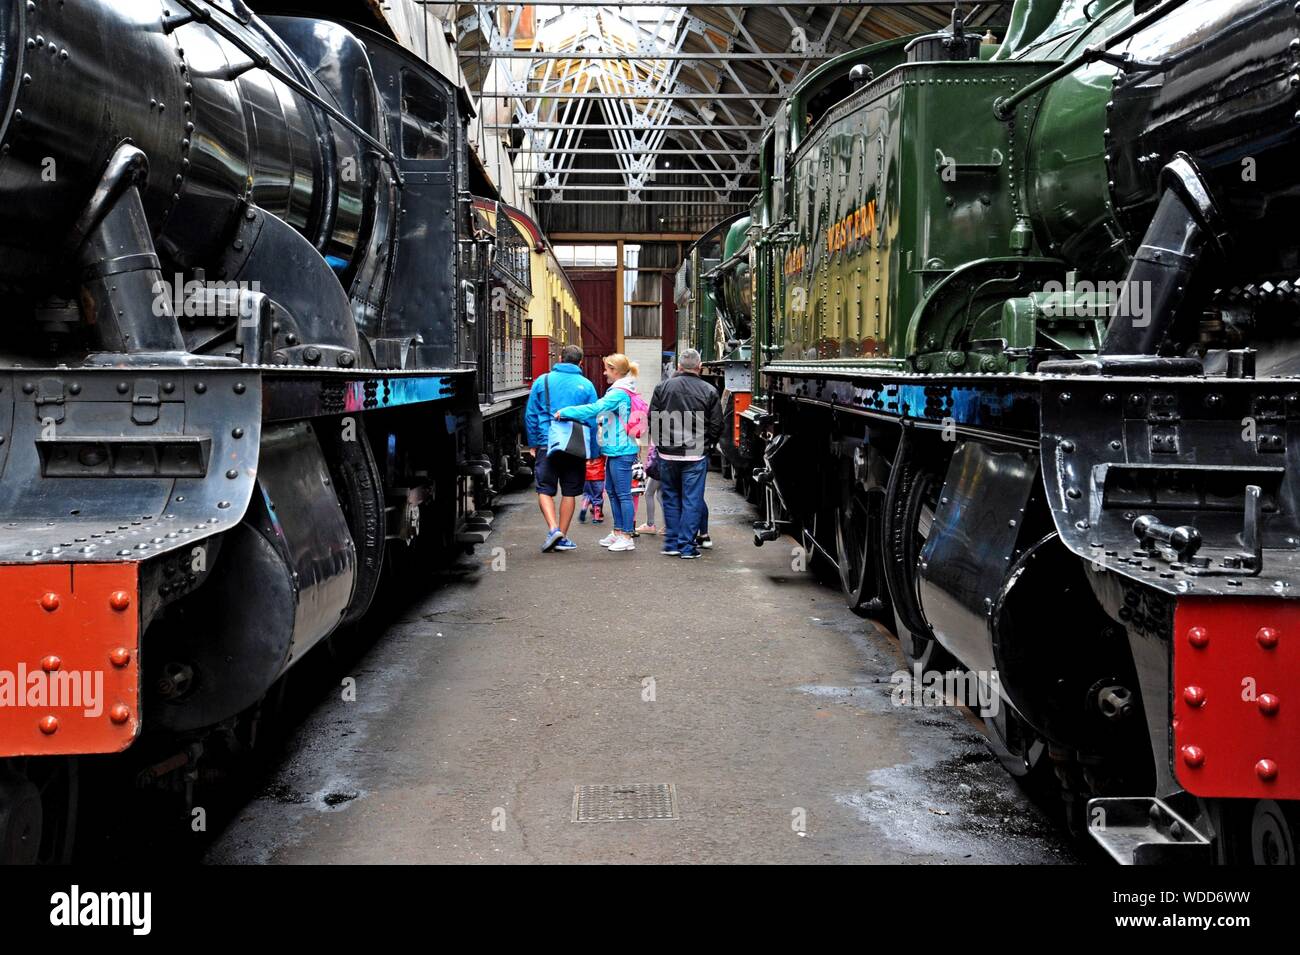 Visitors examine steam lcomotives in the engine shed at Didcot Railway Centre, Oxfordshire Stock Photo